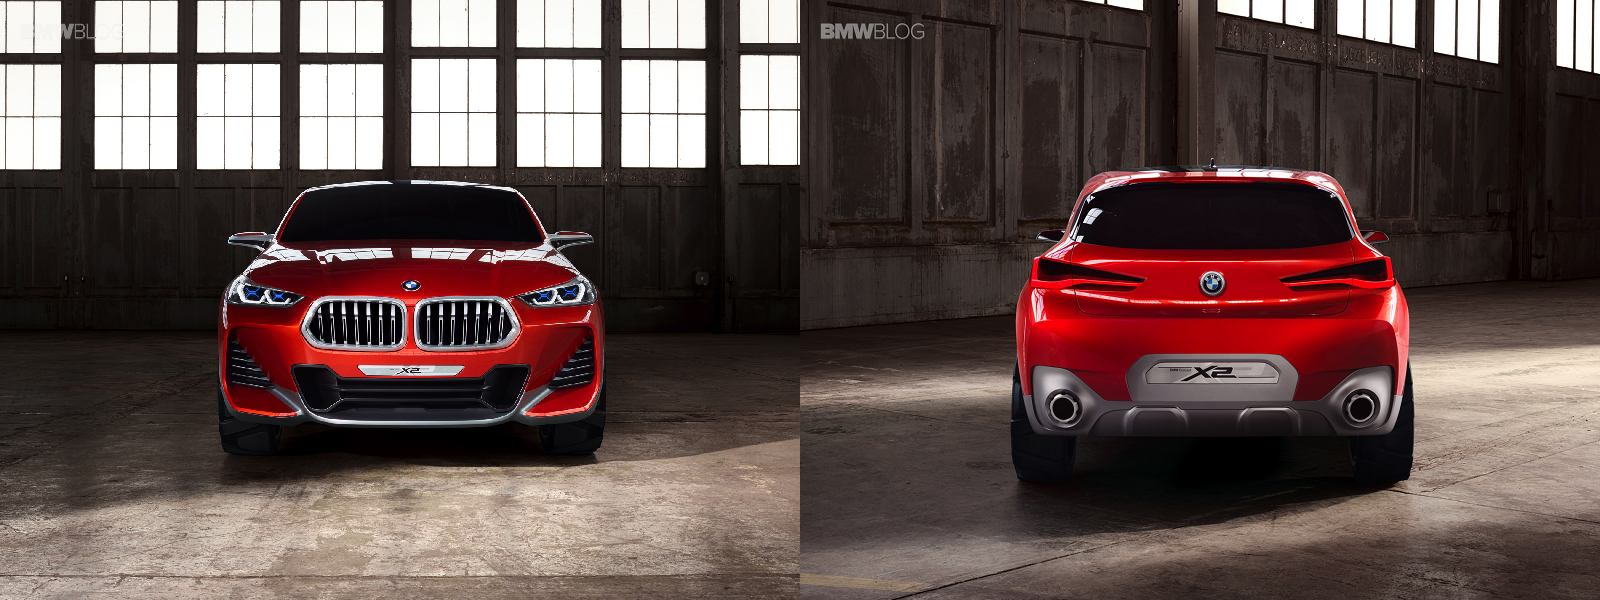 bmw-x2-concept-front-rear